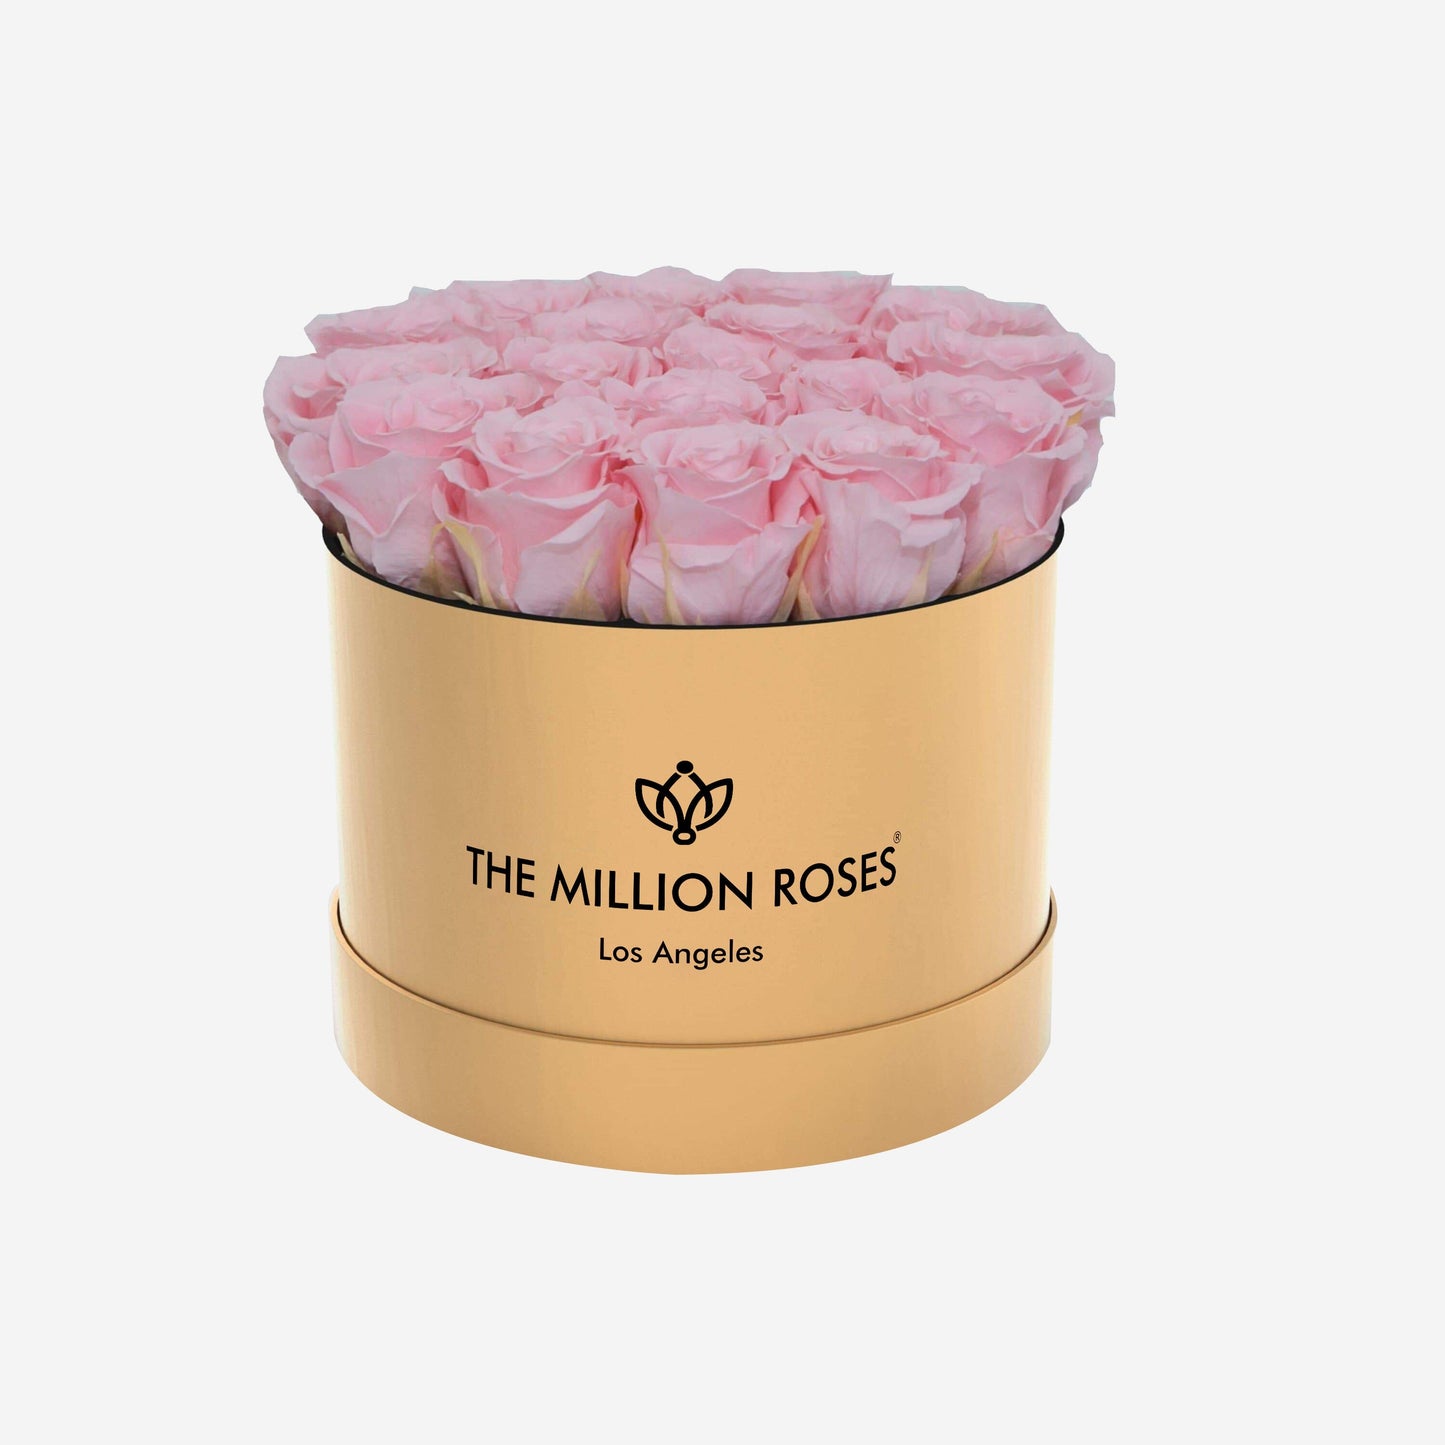 Classic Gold Box | Light Pink Roses - The Million Roses